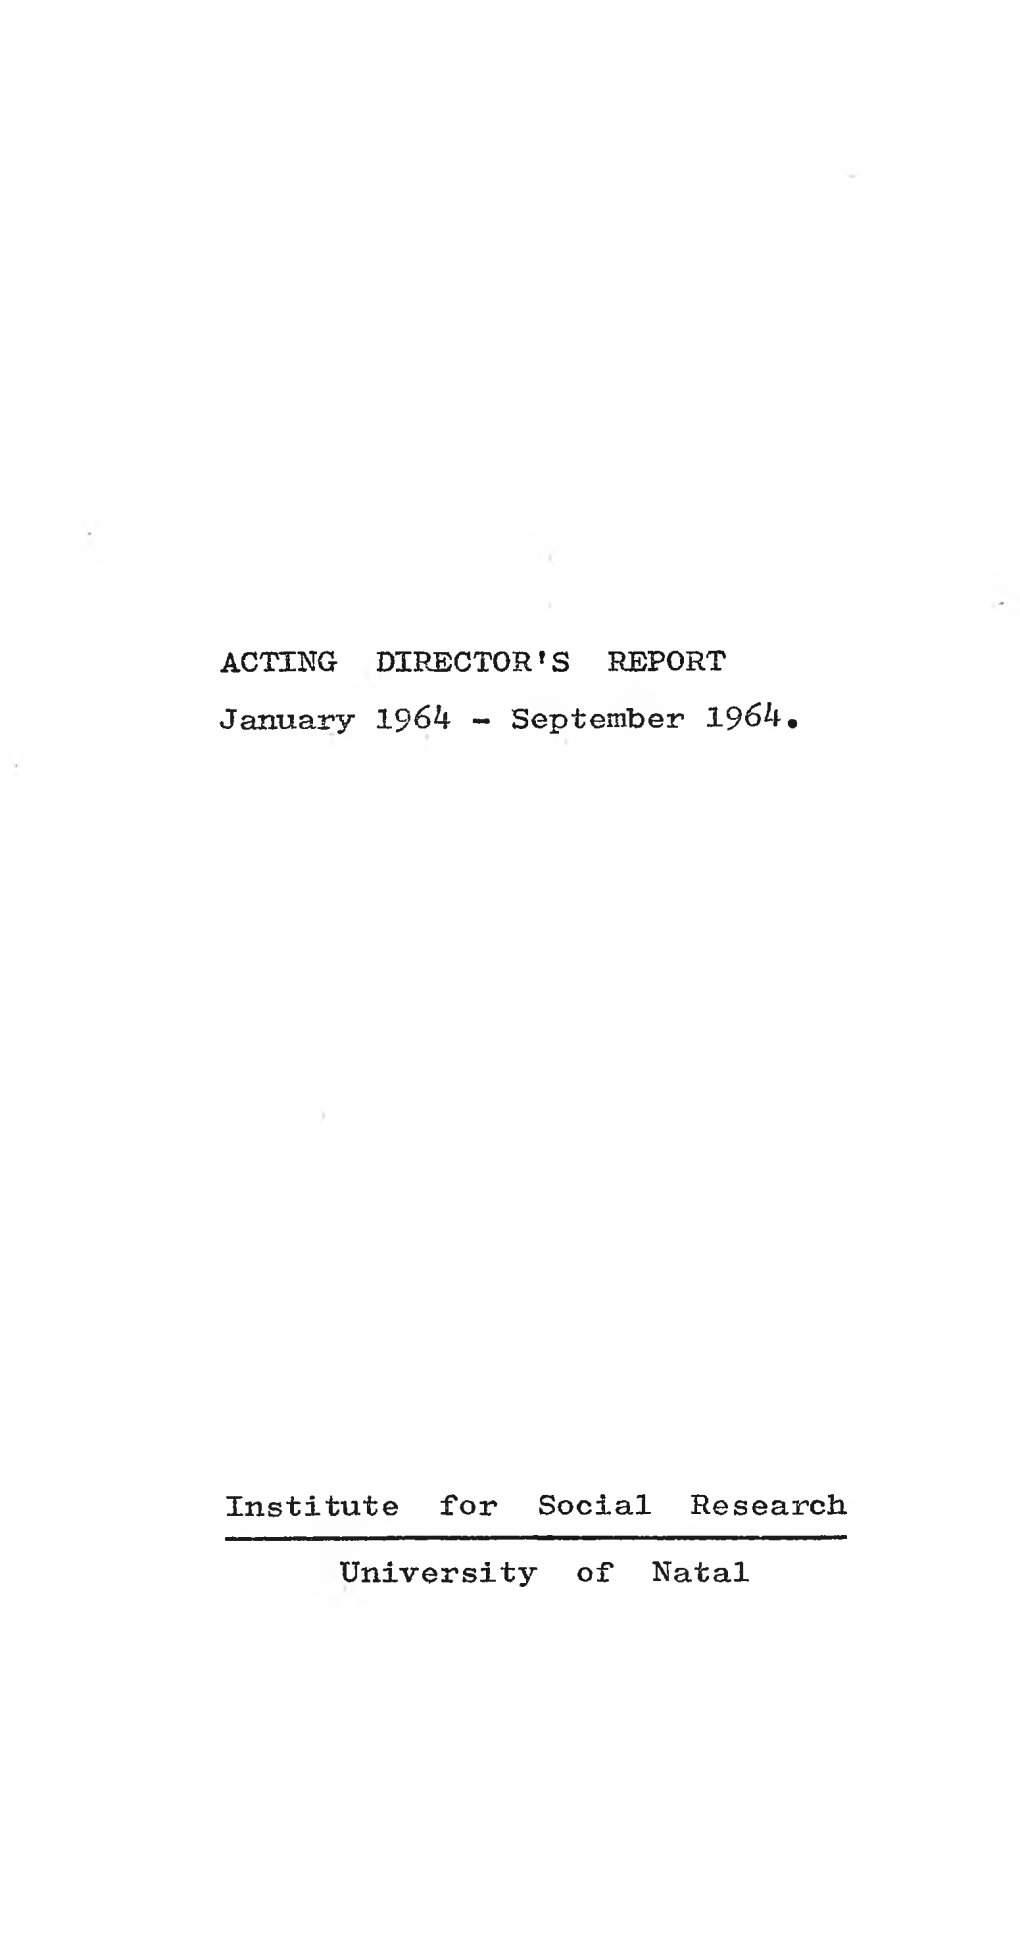 ACTING DIRECTOR * S REPORT January 1964 - September 1964